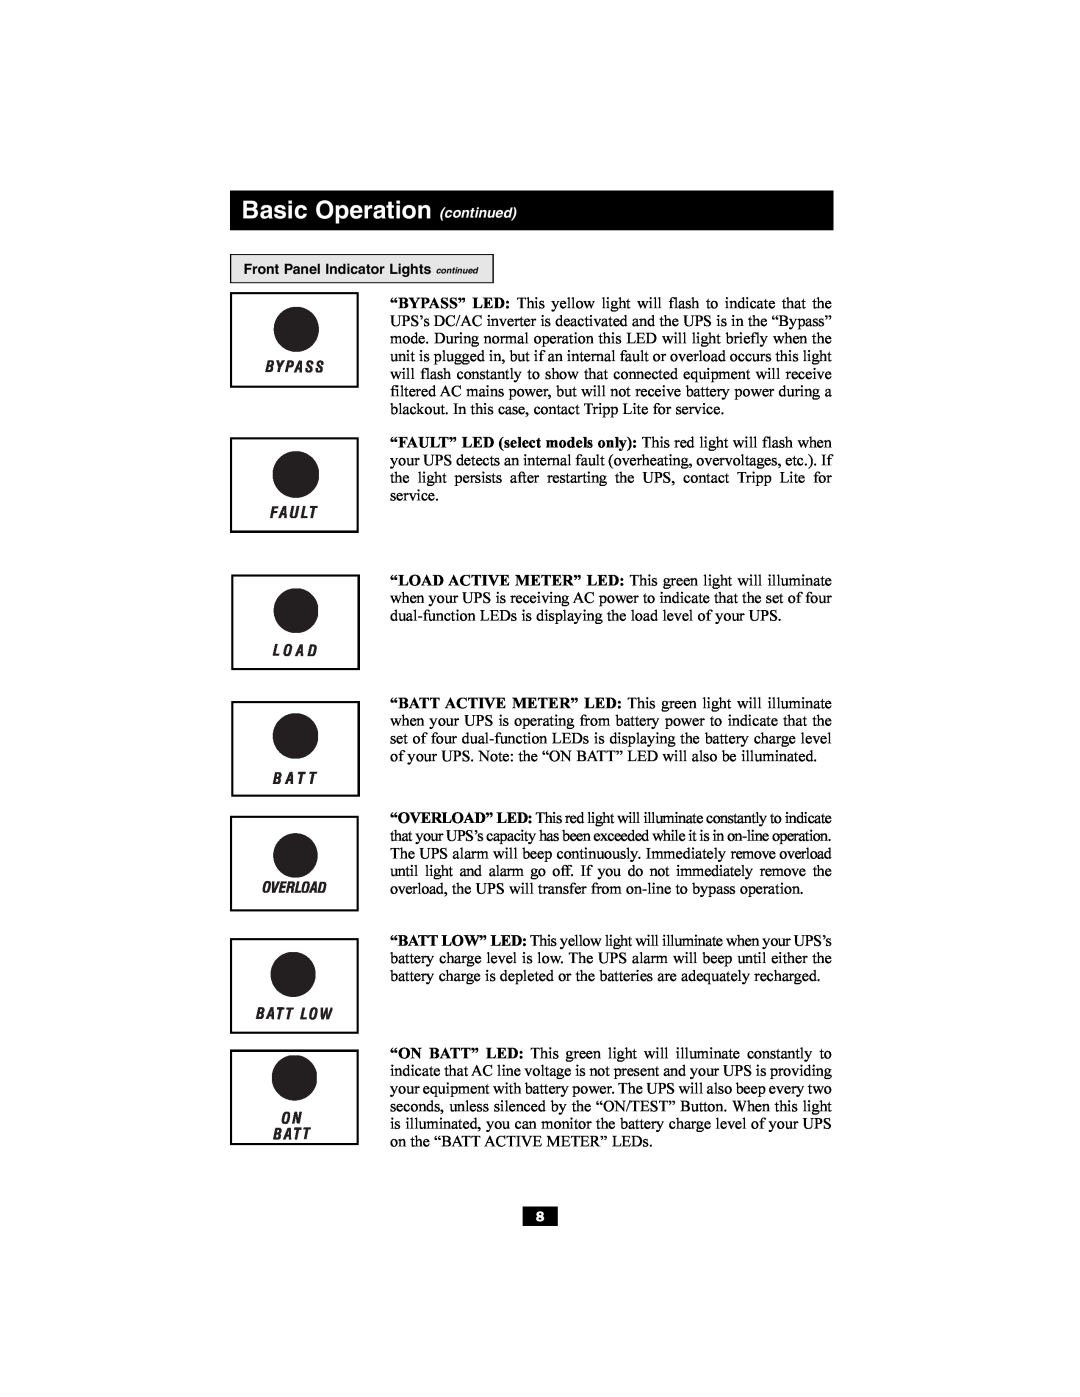 Tripp Lite 93-2486, 200703028 owner manual Basic Operation continued, Front Panel Indicator Lights continued 